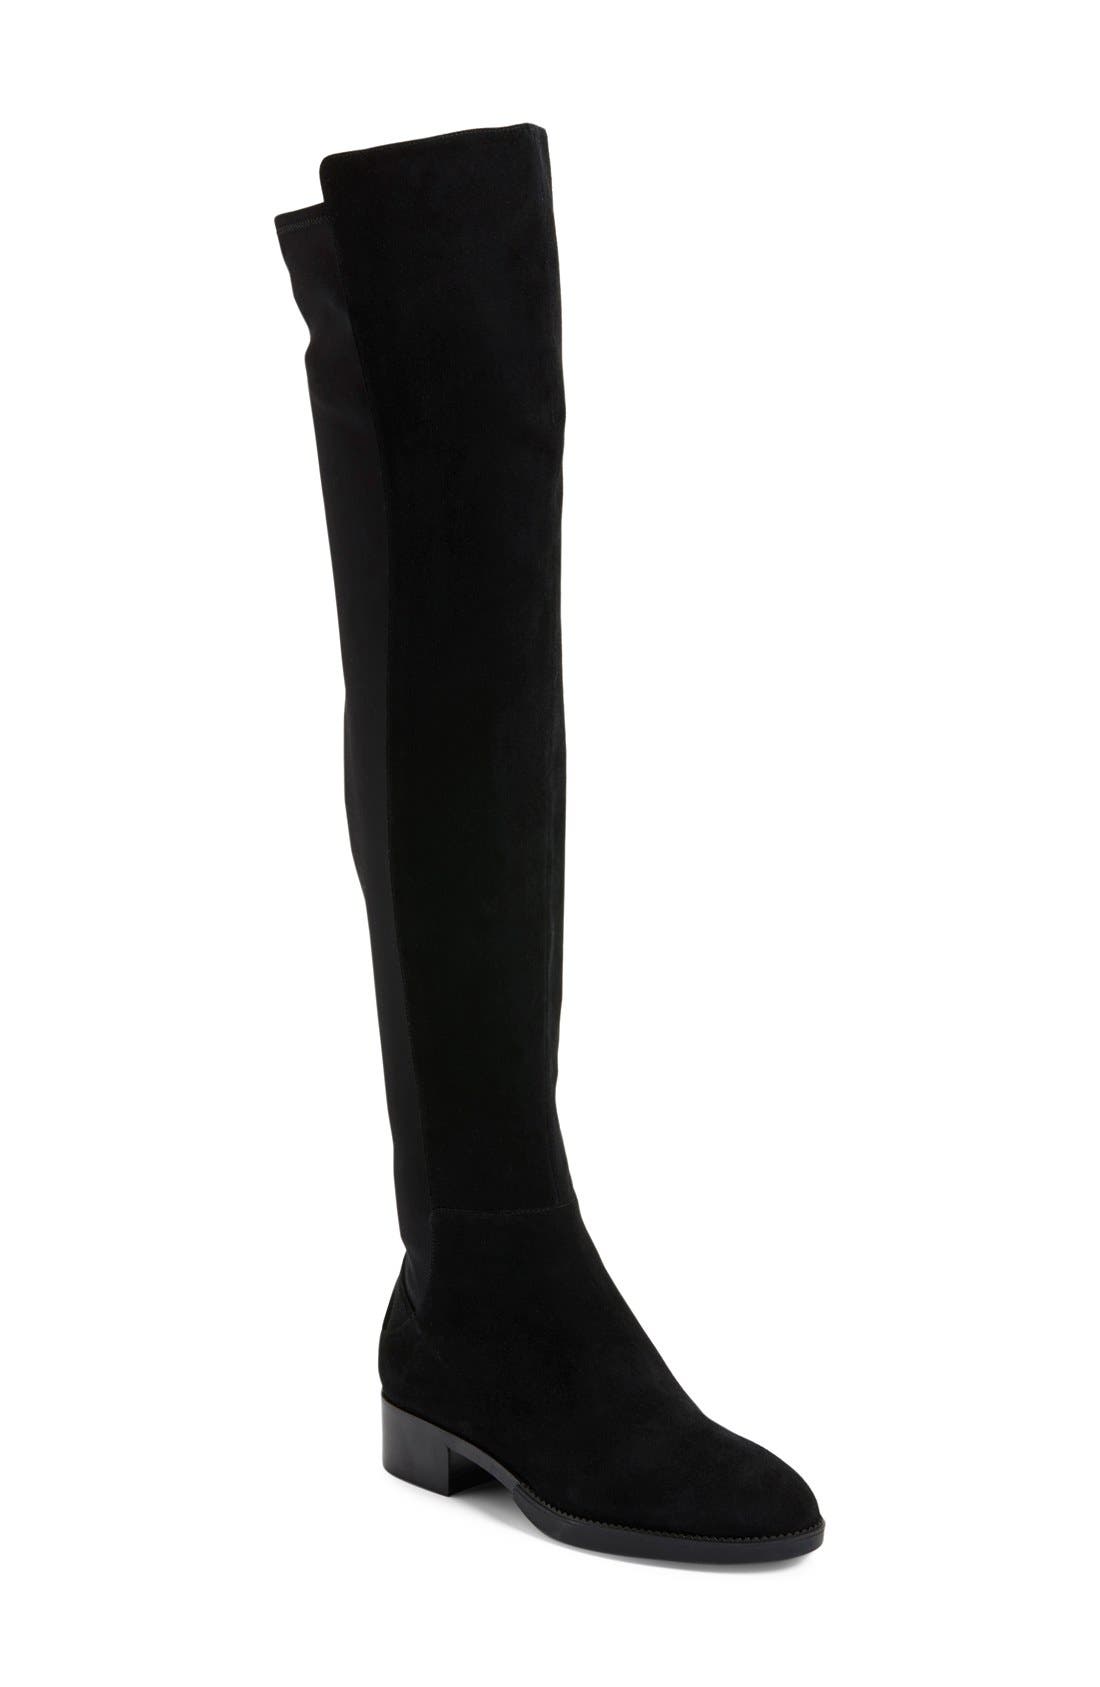 Tory Burch 'Caitlin' Over the Knee Boot 